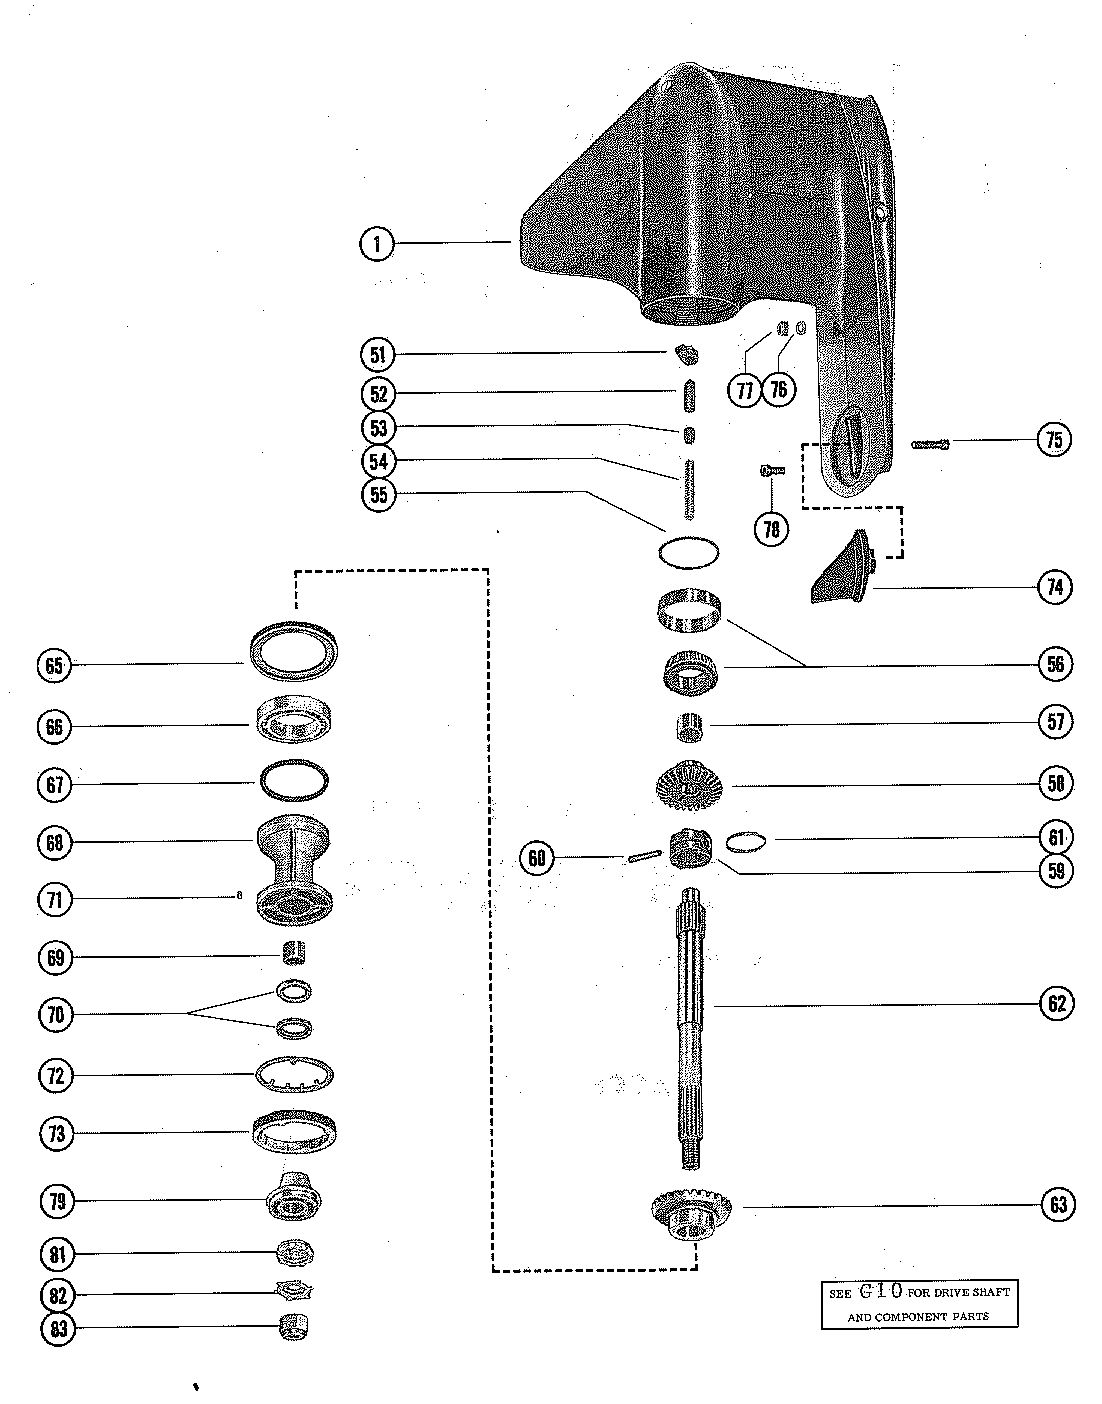 MARINER MARINER 85 GEAR HOUSING ASSEMBLY, COMPLETE (PAGE 2)